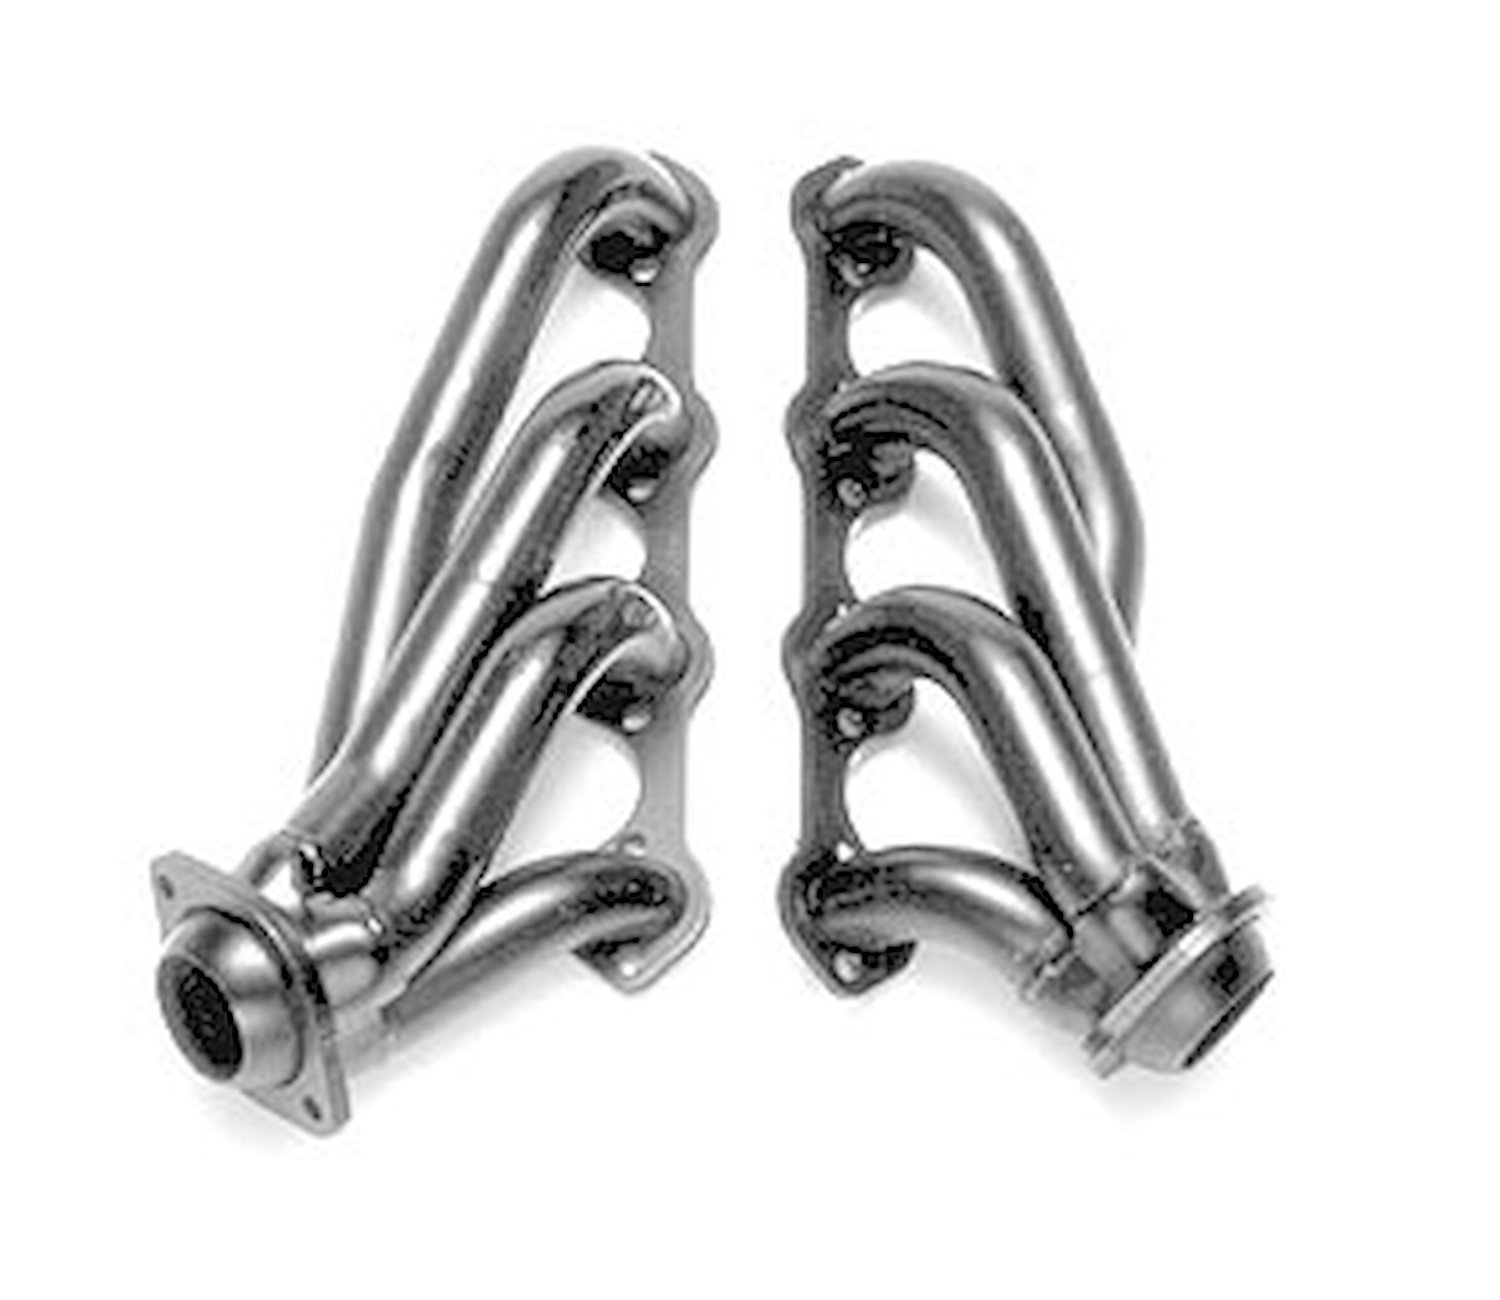 Standard Duty Uncoated Shorty Headers for 1986-93 Ford Mustang 5.0L